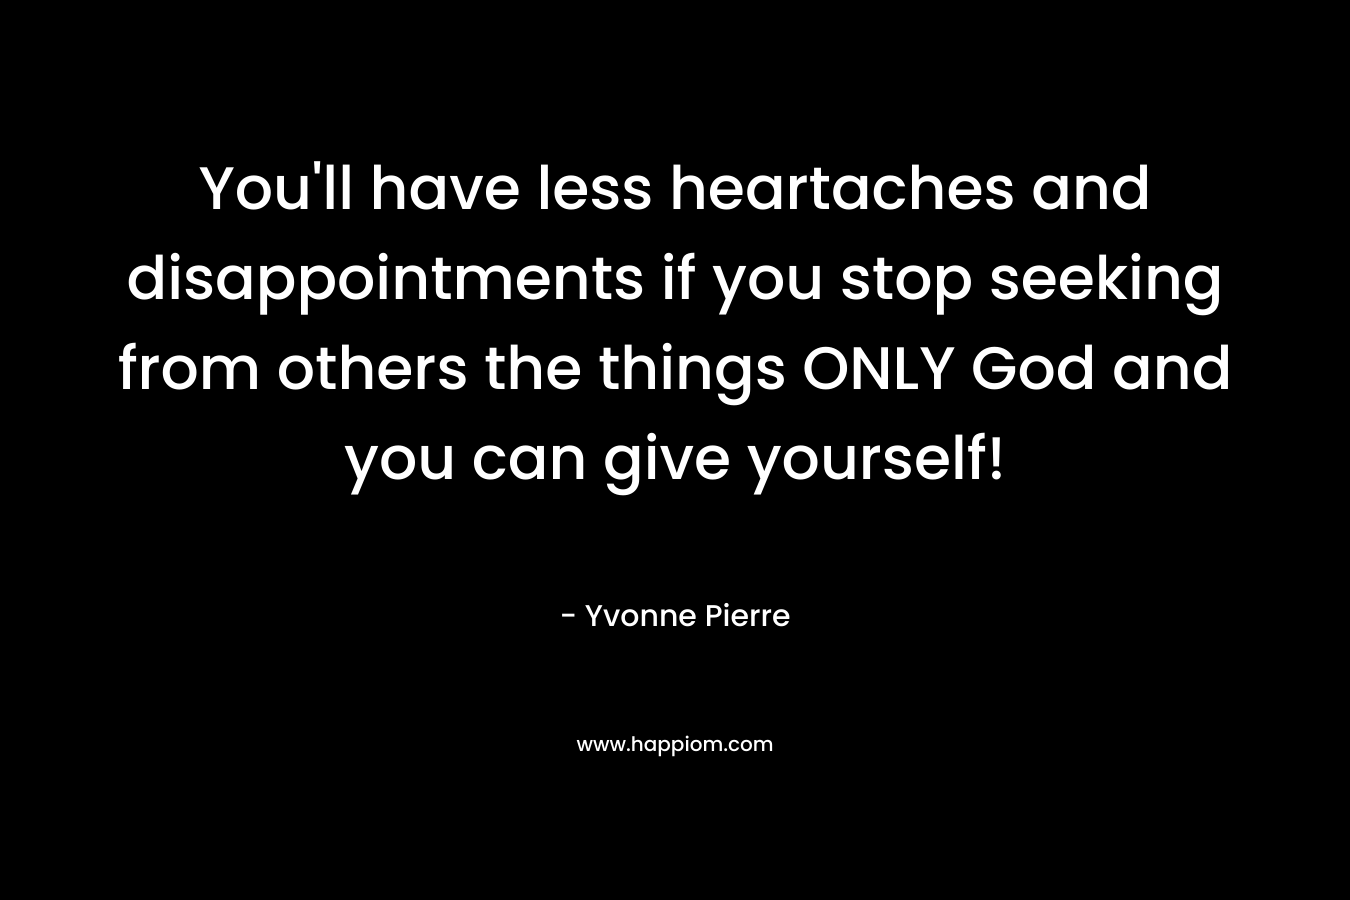 You’ll have less heartaches and disappointments if you stop seeking from others the things ONLY God and you can give yourself! – Yvonne Pierre